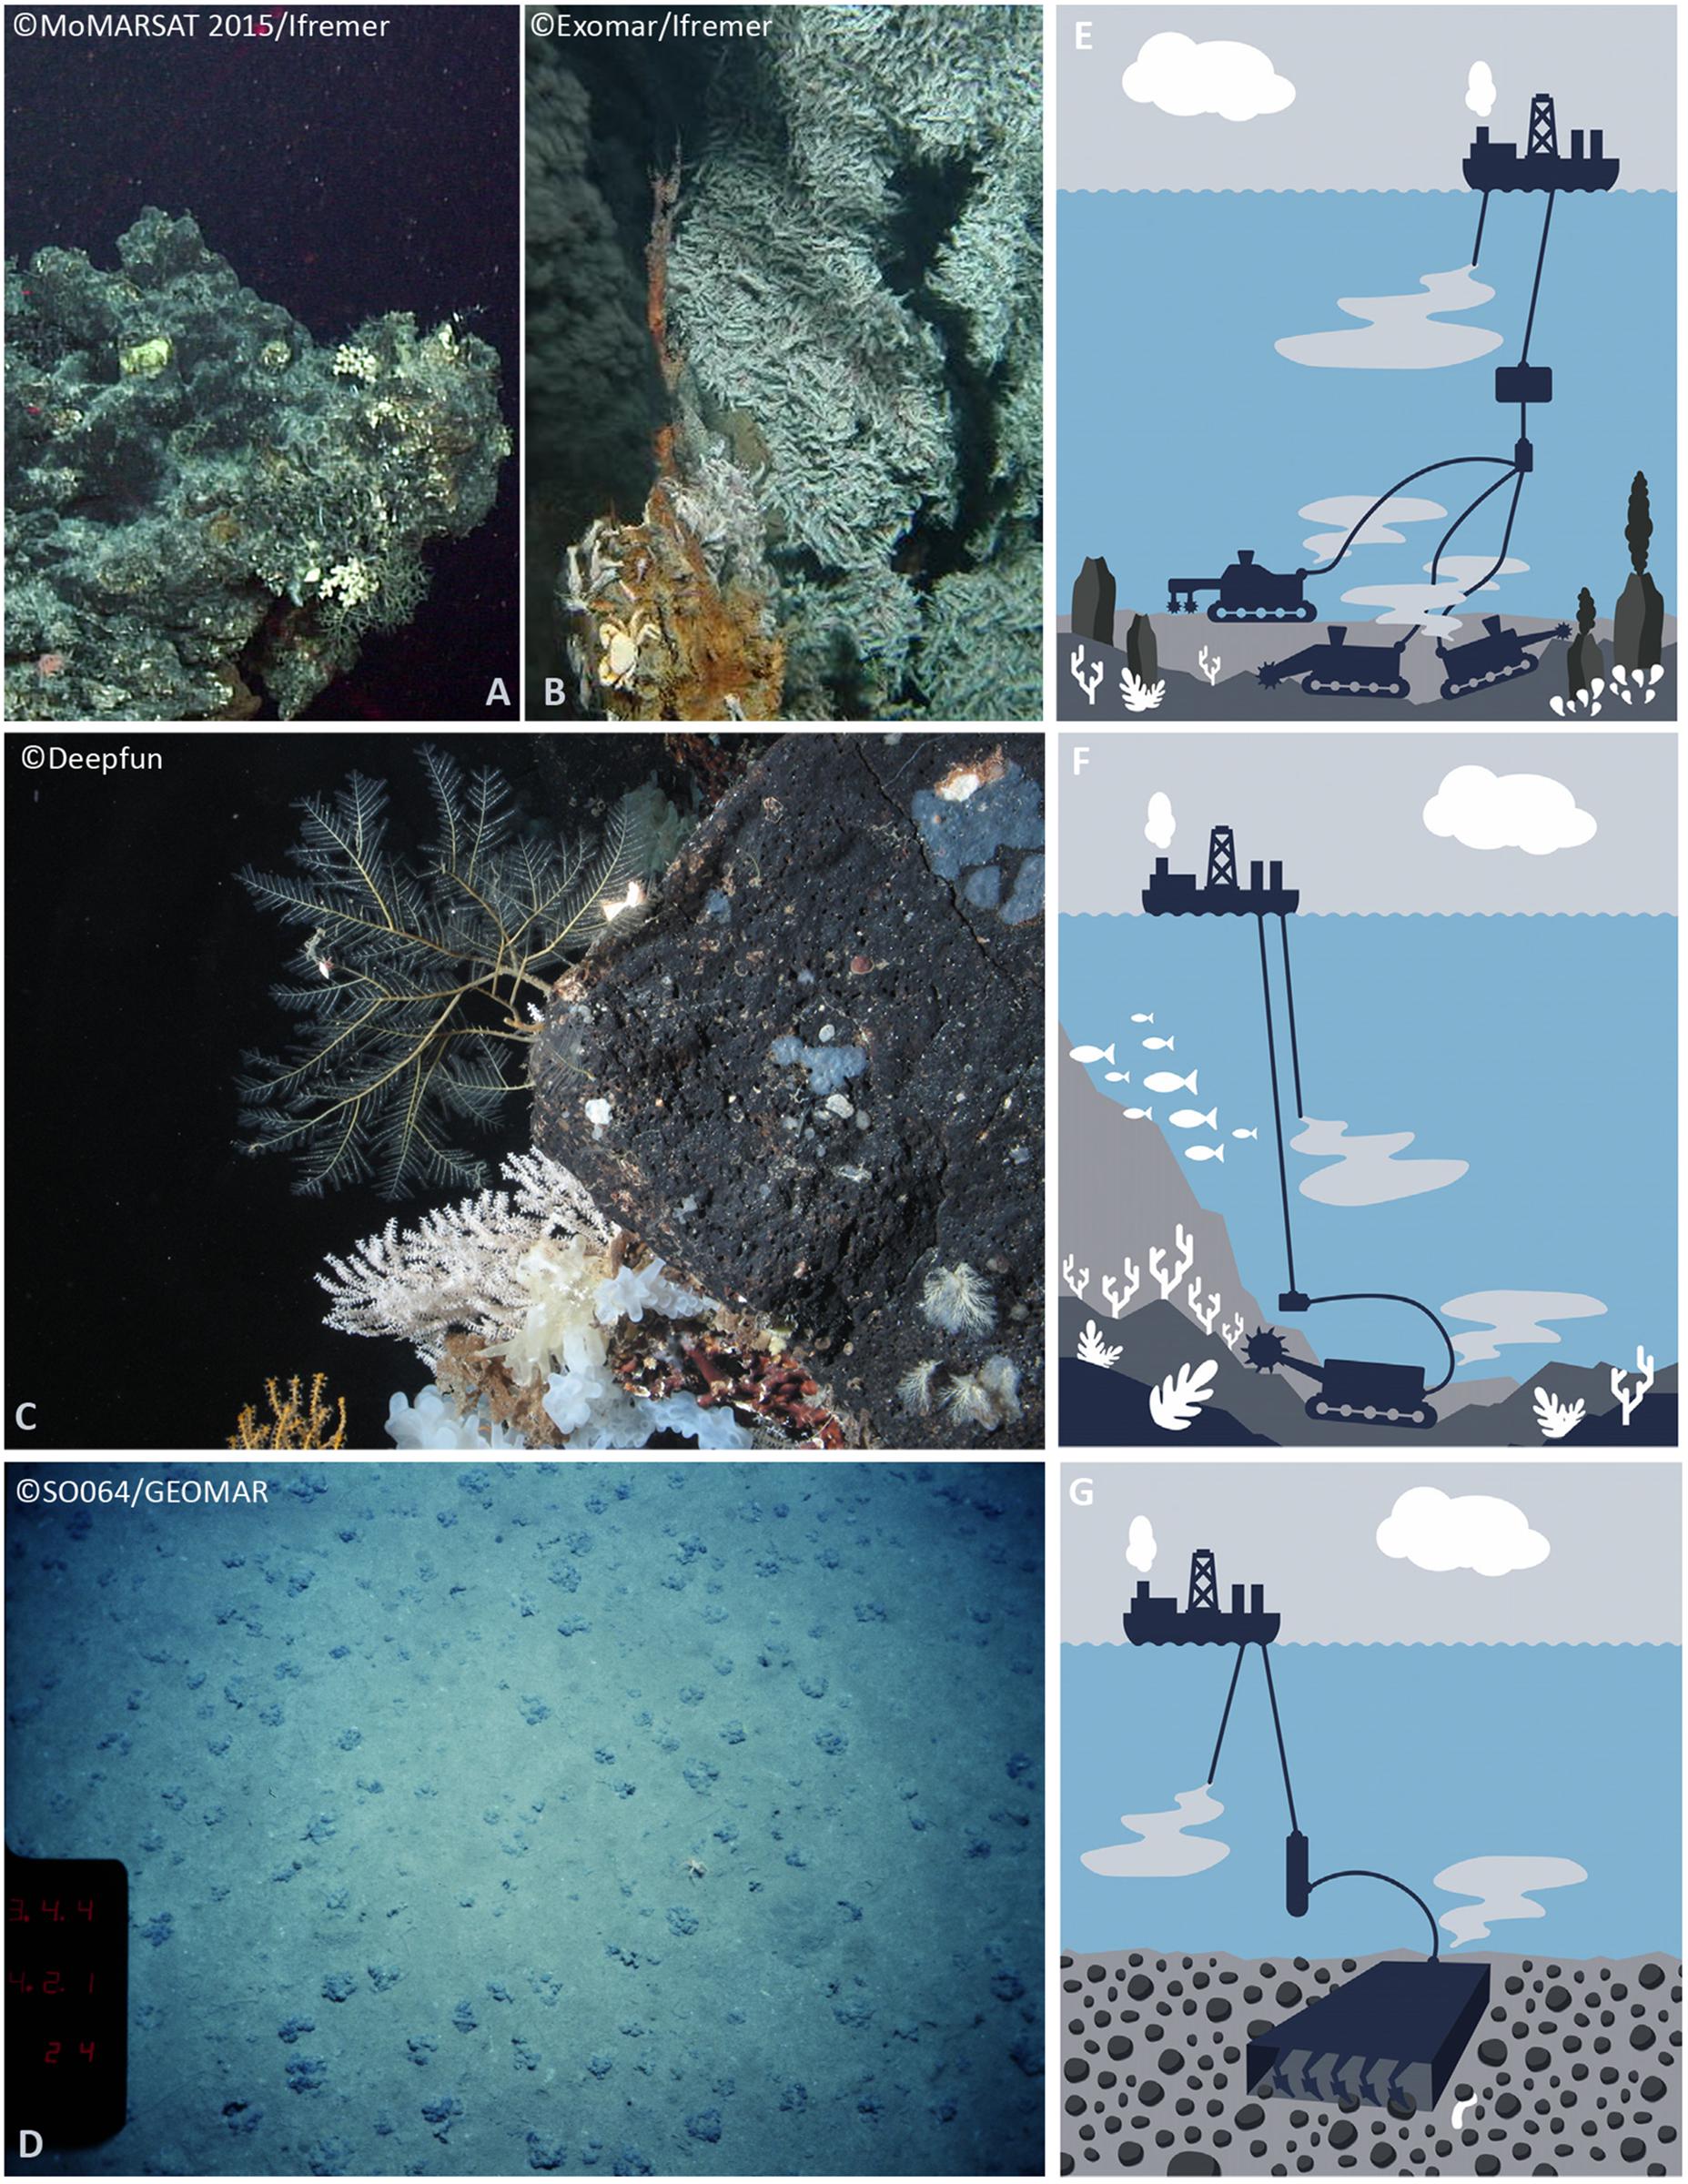 Deep-sea mining: Climate solution or ecological threat?